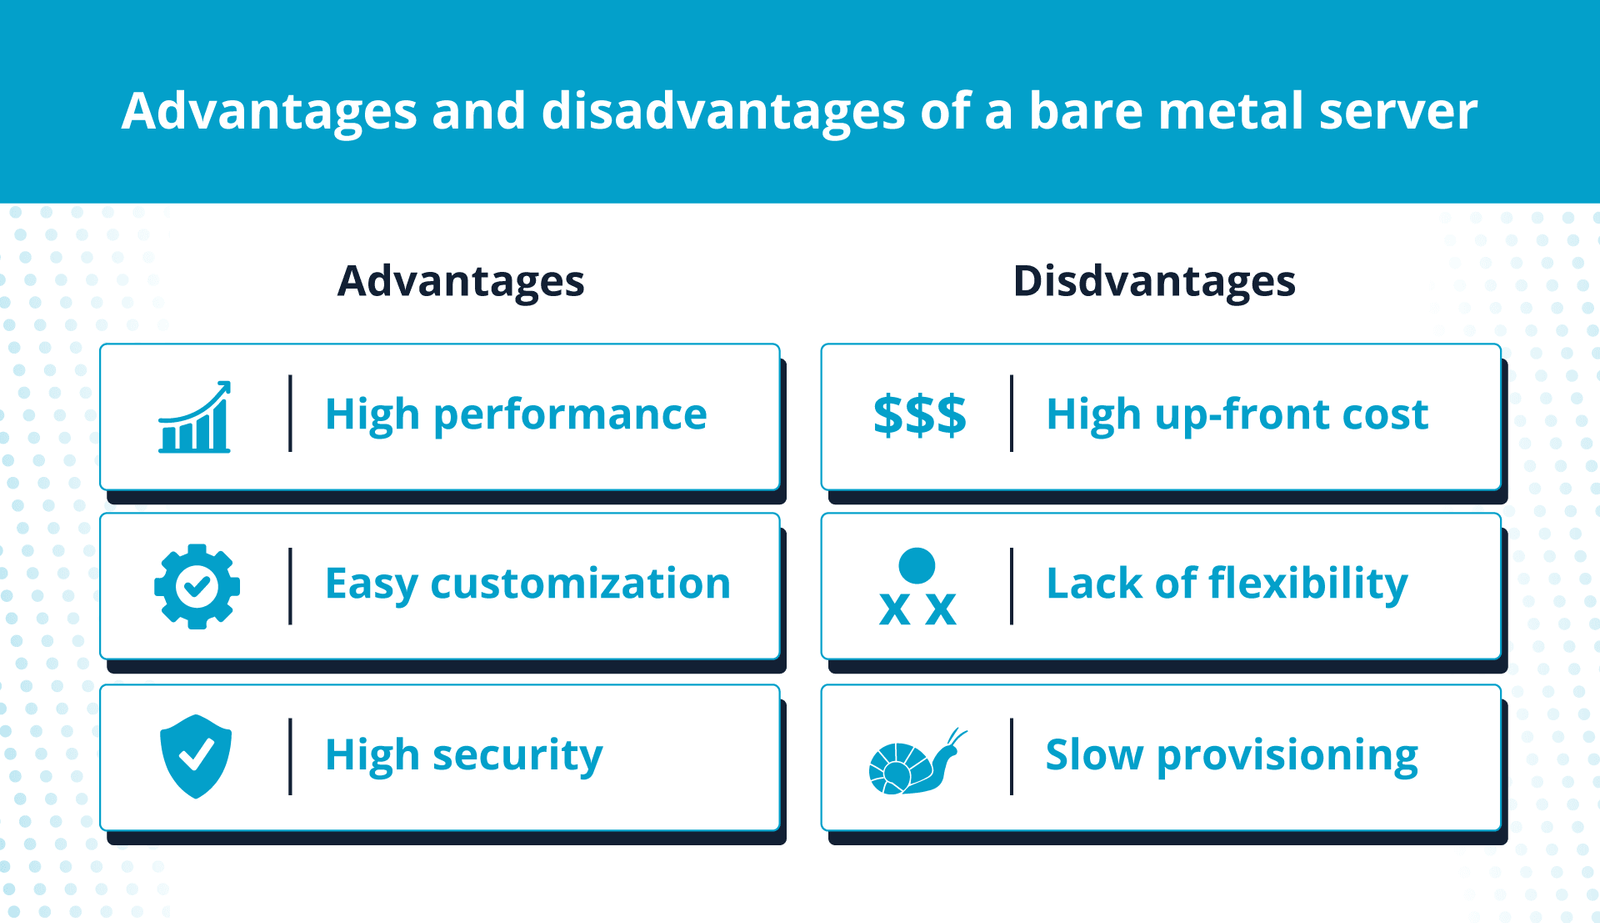 Here are the advantages and disadvantages of a bare metal server.